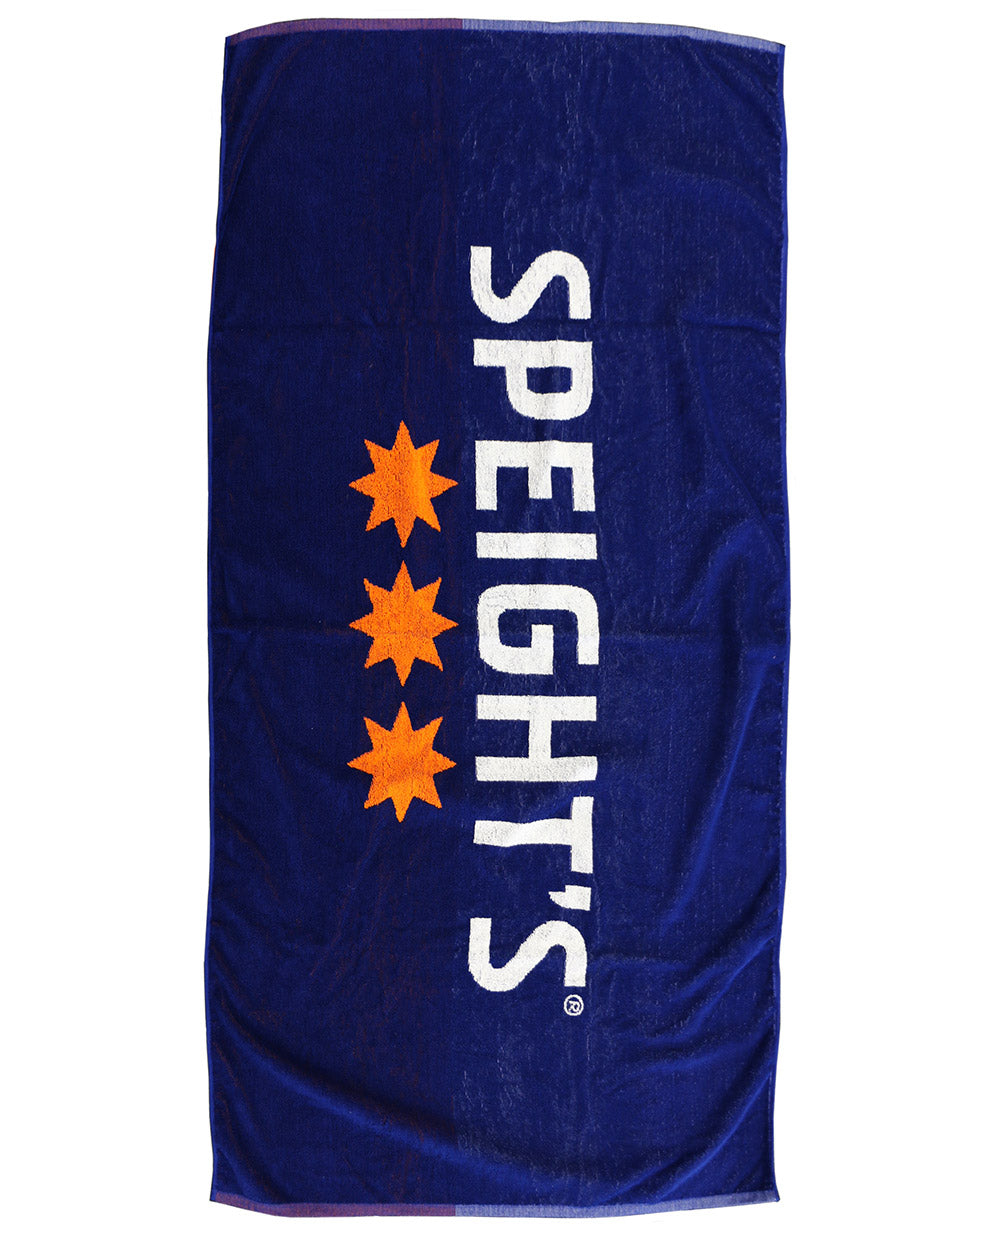 Speight's Beach Towel -  Beer Gear Apparel & Merchandise - Speights - Lion Red - VB - Tokyo Dy merch